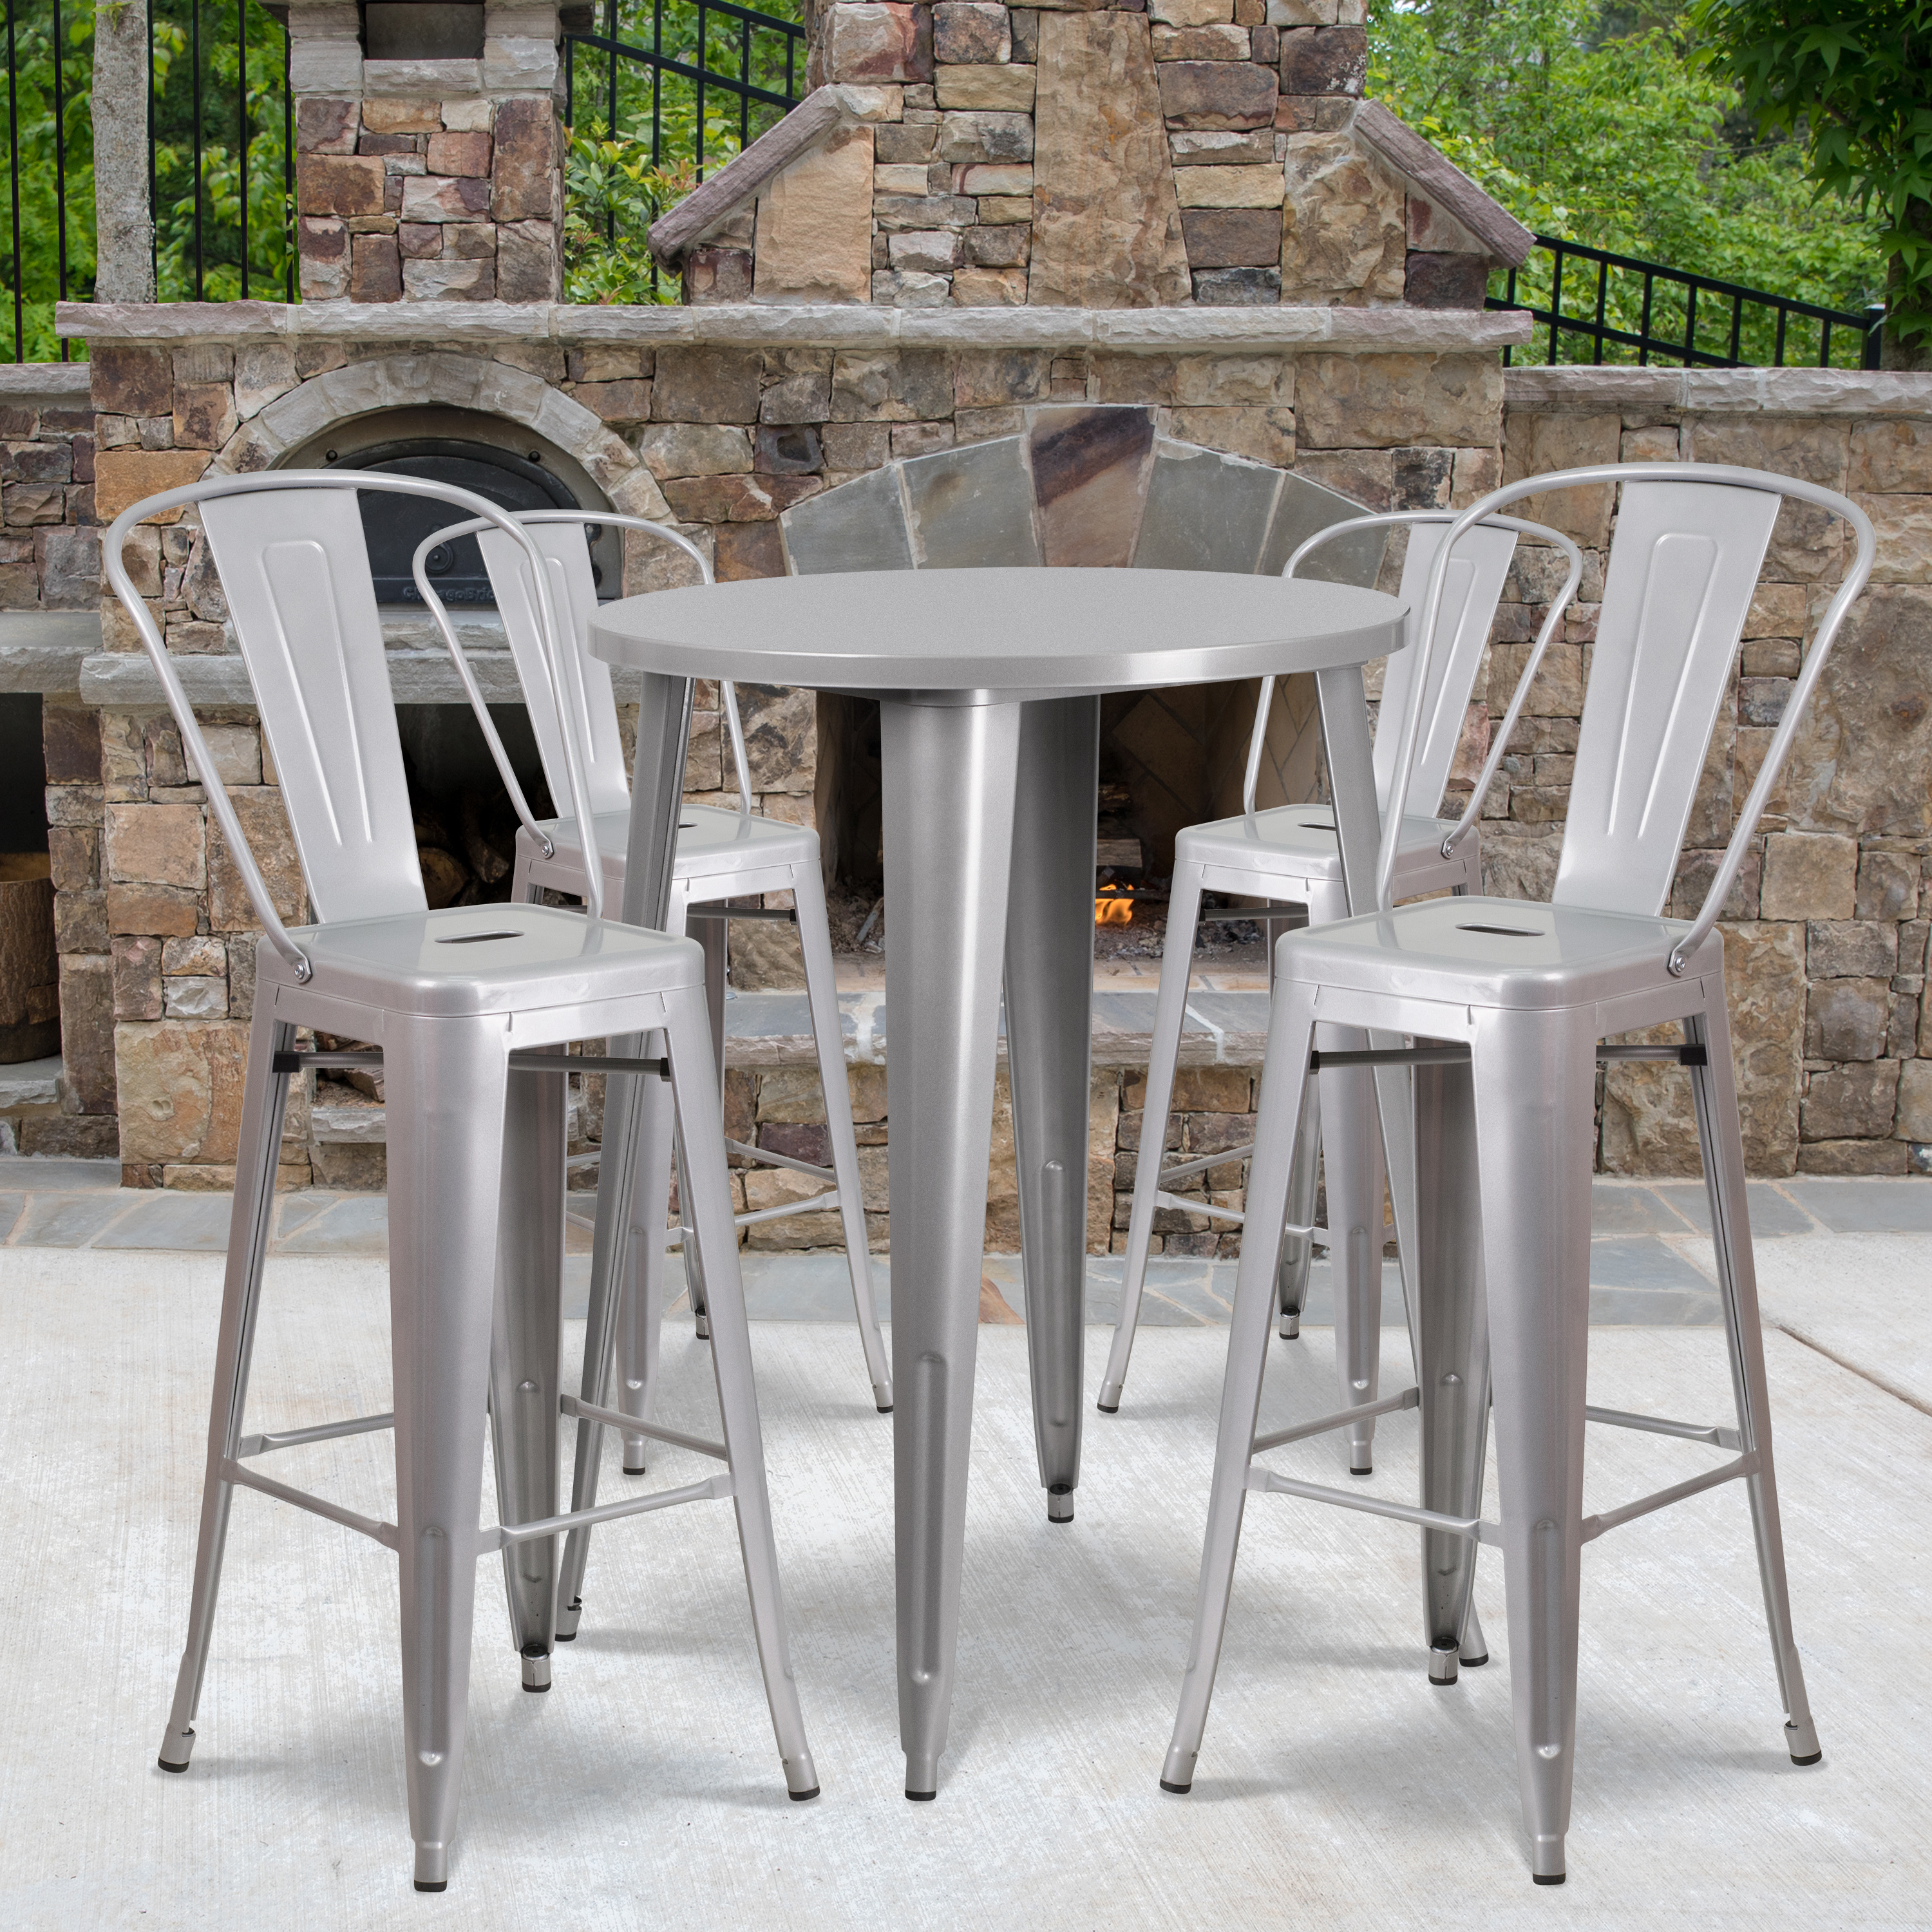 Flash Furniture Commercial Grade 30" Round Silver Metal Indoor-Outdoor Bar Table Set with 4 Cafe Stools - image 1 of 5